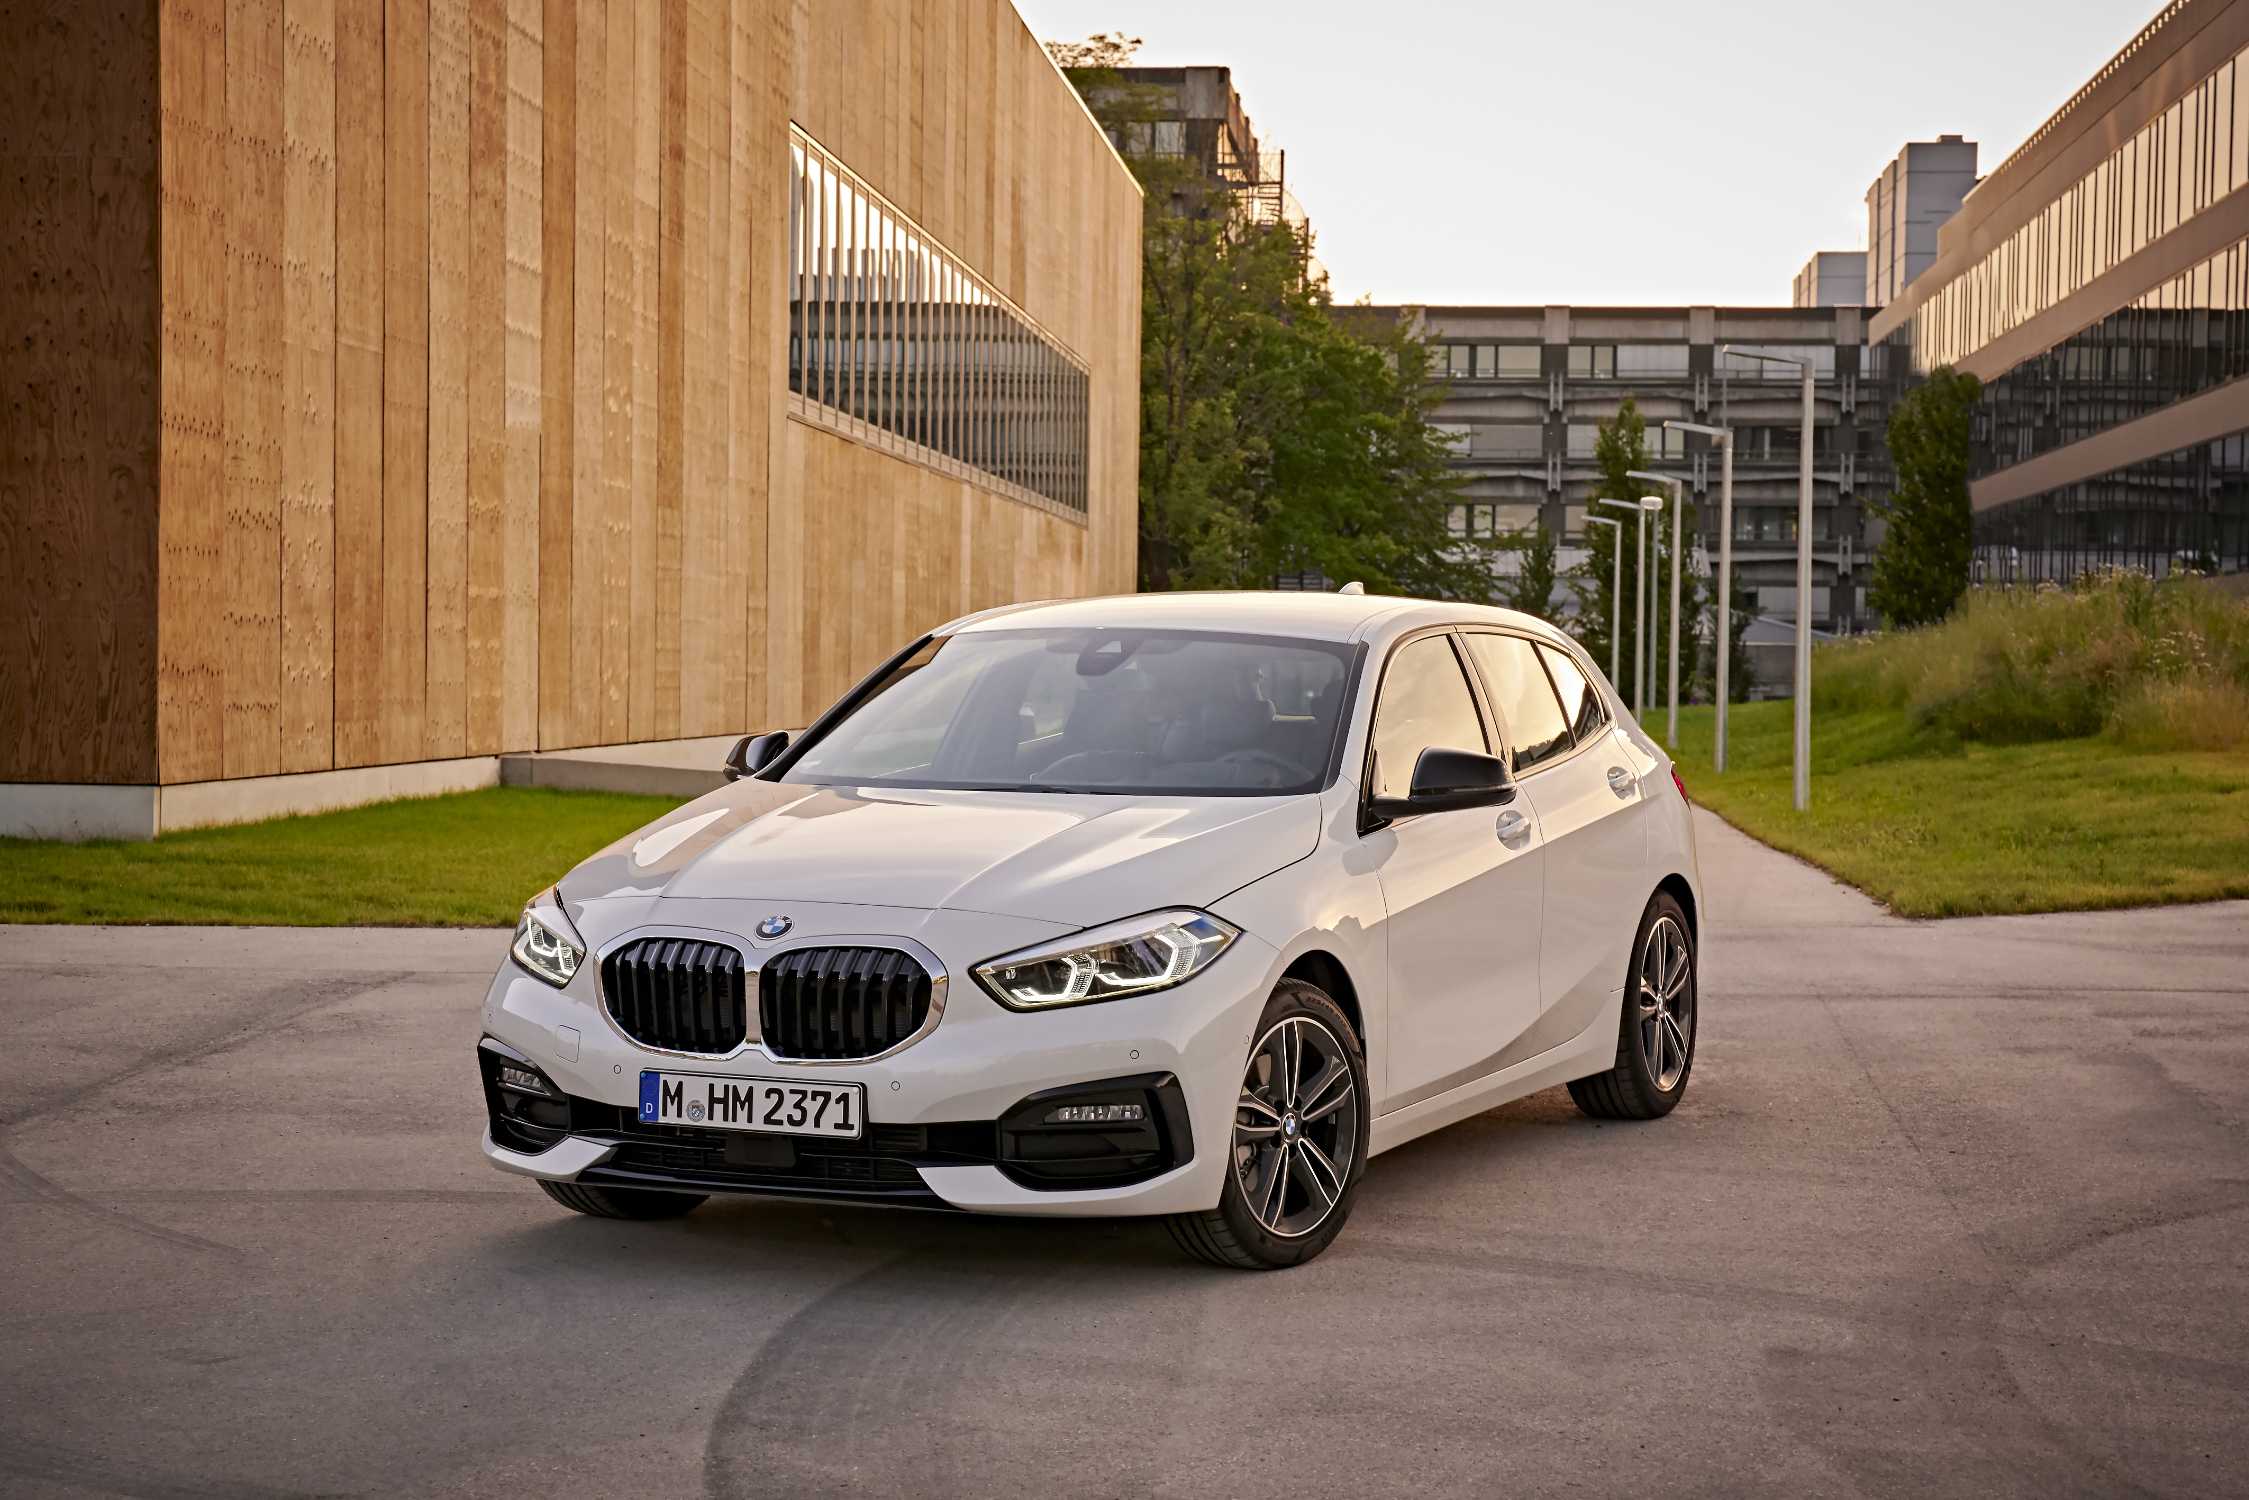 all-new BMW 1 Series Sport Line FULL REVIEW 1-Series 1er 118d